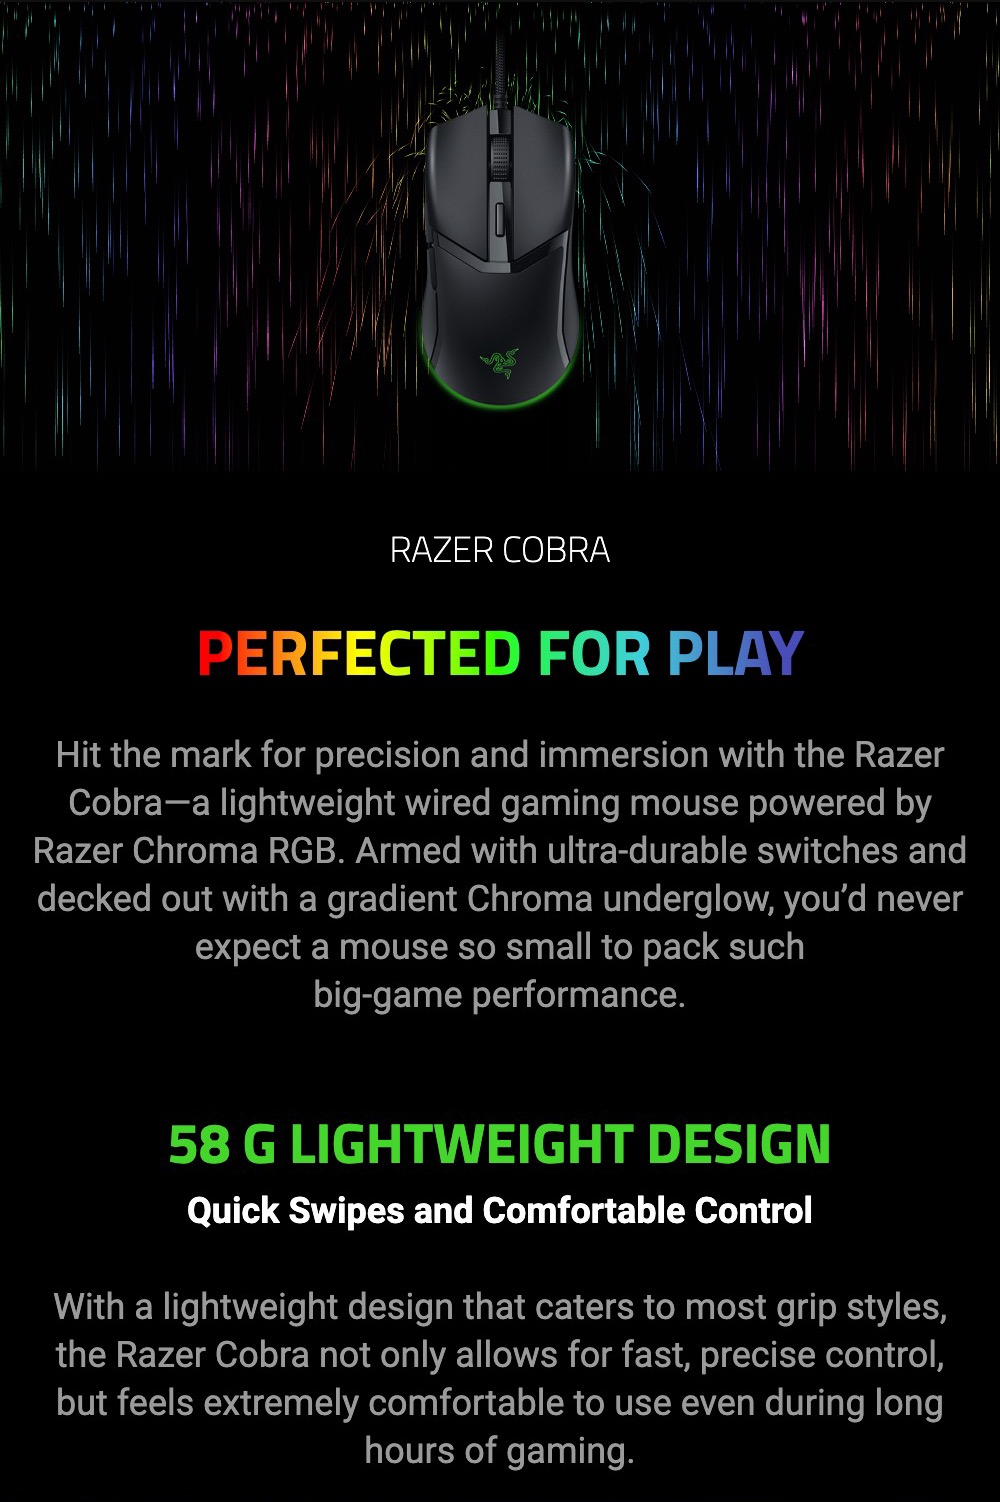 Razer-Cobra-Lightweight-Wired-Gaming-Mouse-with-Razer-Chroma-RGB-Product-Description-1